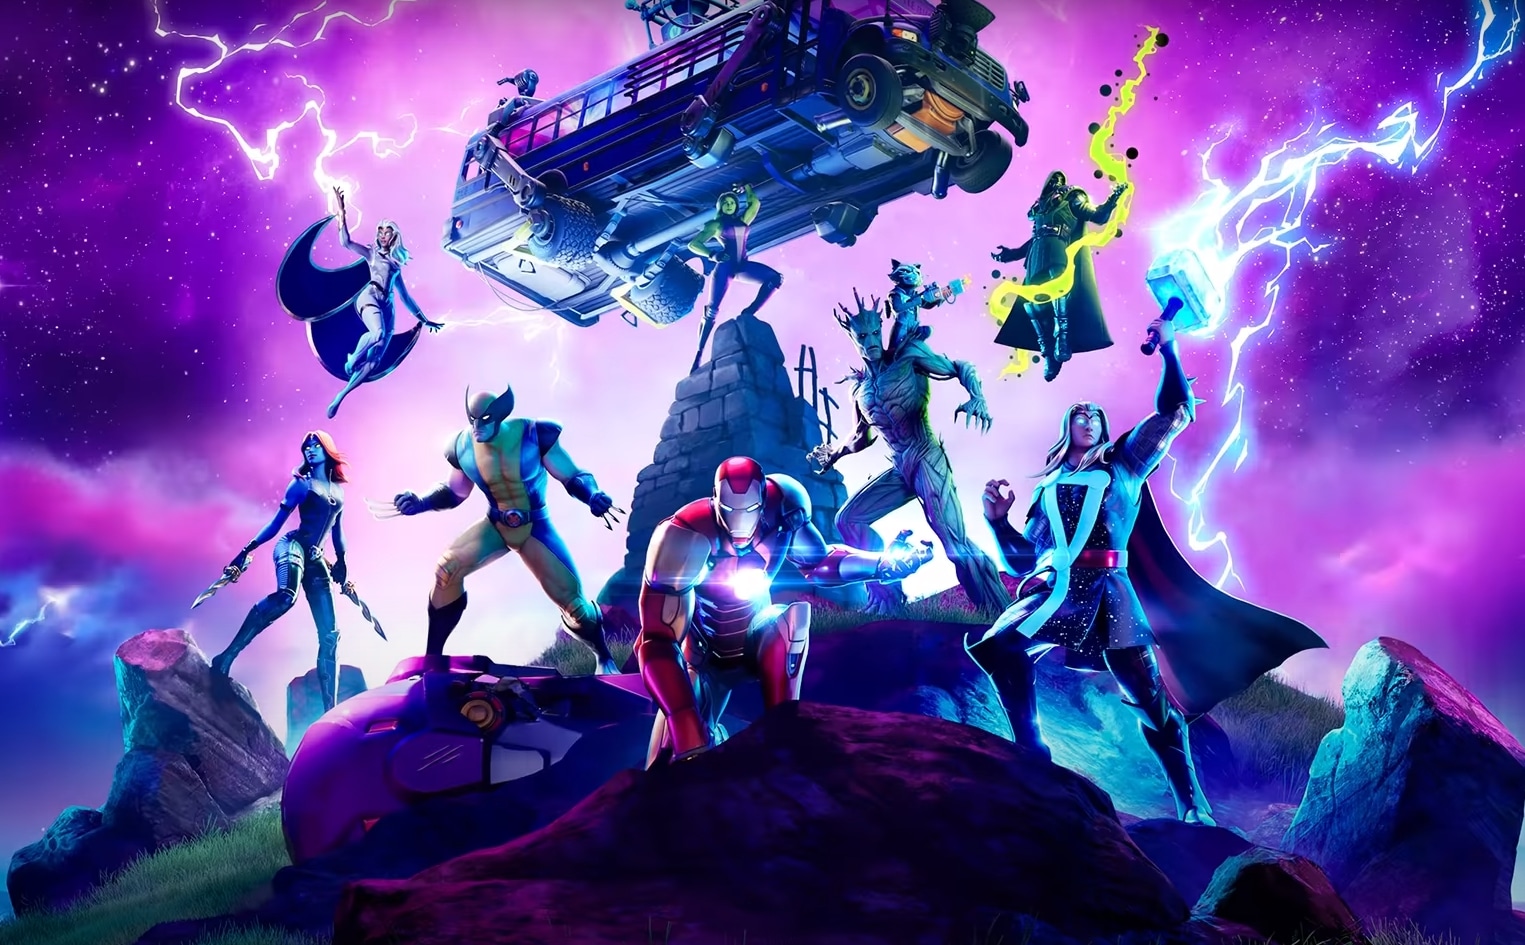 Is Spider-man coming to Fortnite?